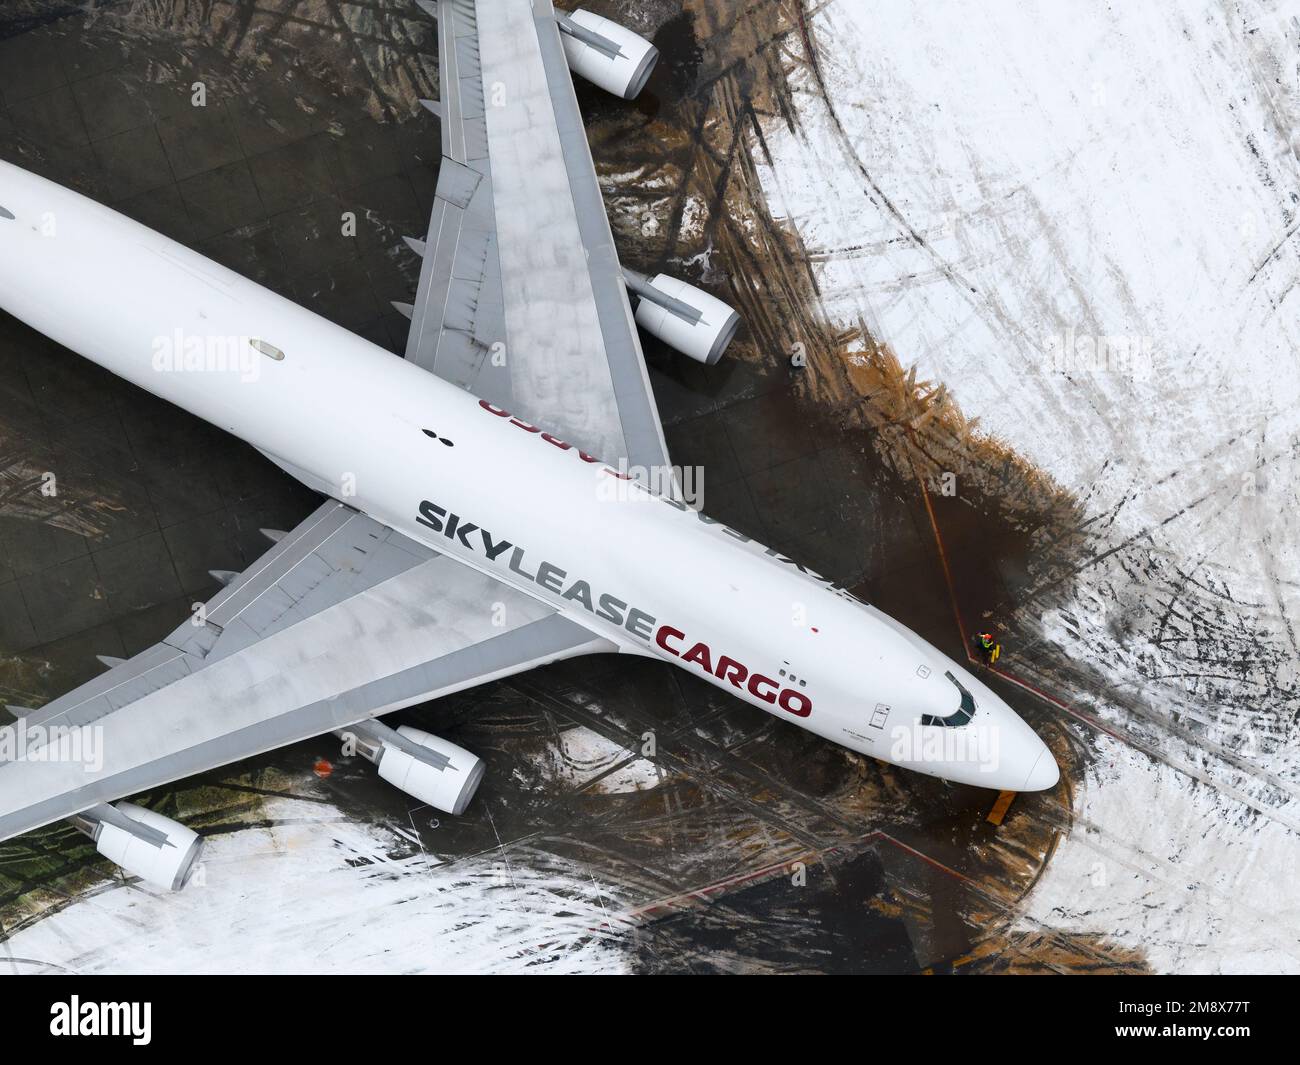 Skylease cargo Boeing 747-400 aircraft parked at Anchorage Airport after snow. Four engines airplane 747-400F of Sky Lease Cargo after snow storm. Stock Photo